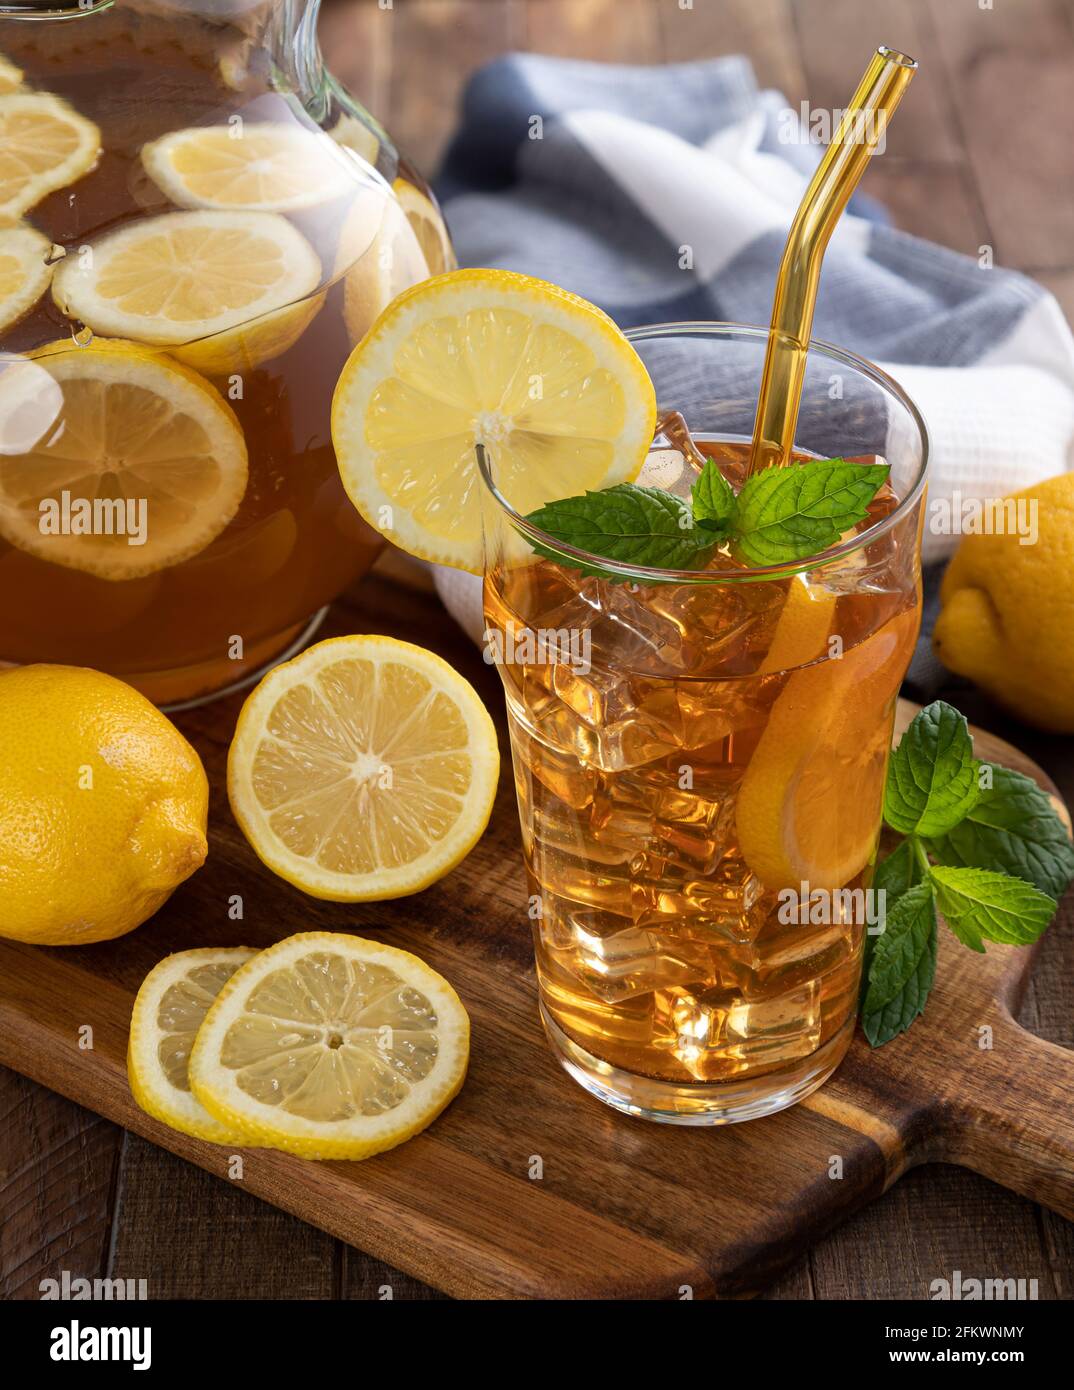 https://c8.alamy.com/comp/2FKWNMY/glass-of-iced-tea-and-pitcher-with-lemon-slices-on-a-wooden-table-2FKWNMY.jpg